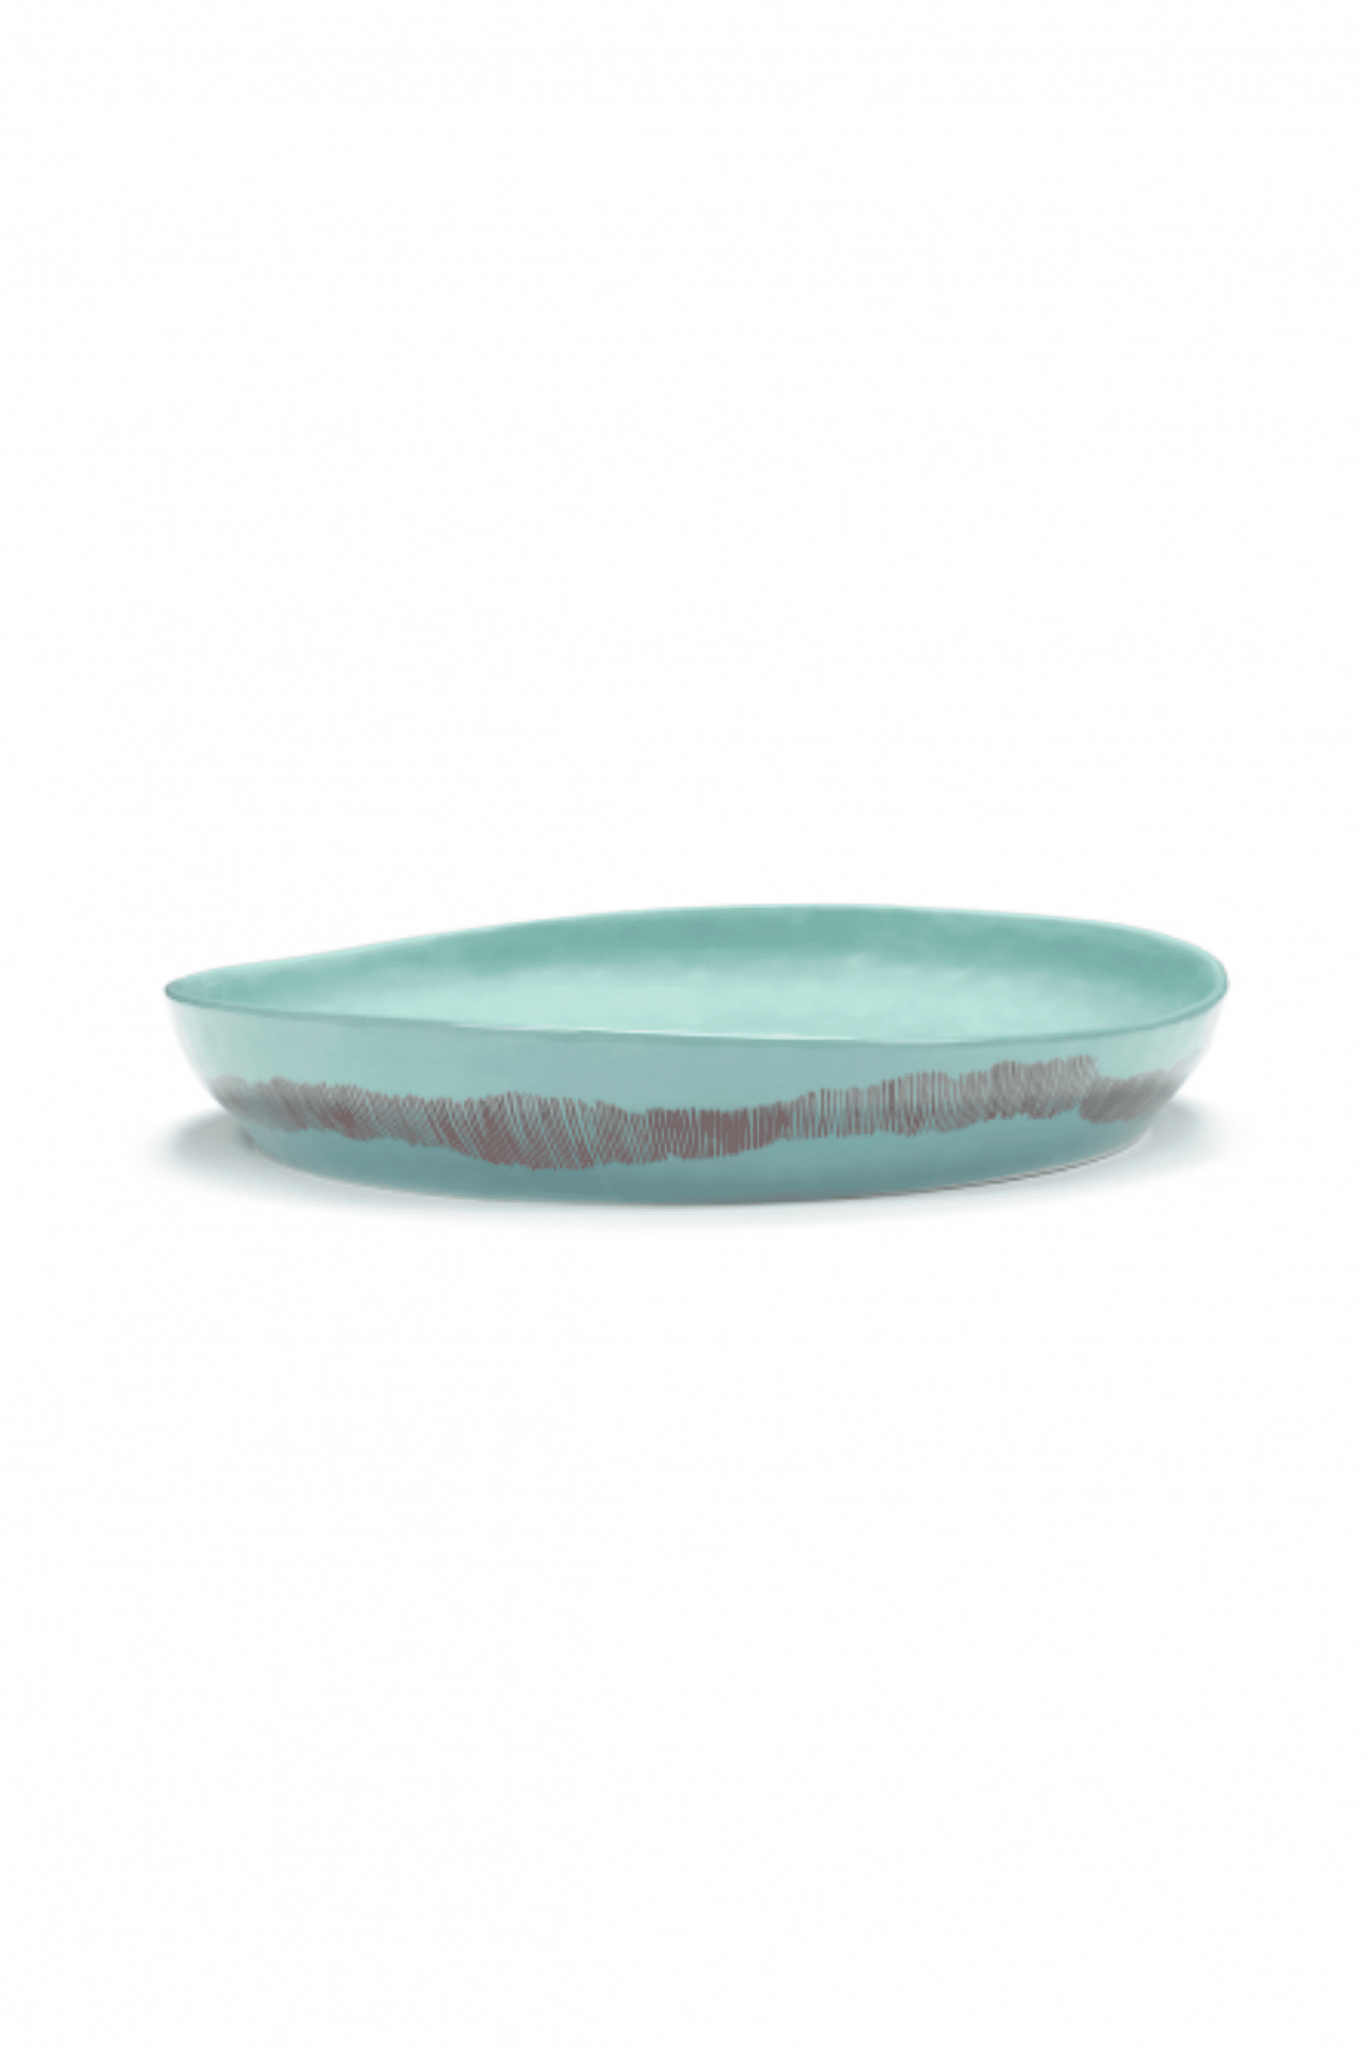 Medium Serving Plate, Azure Swirl with Red Stripes